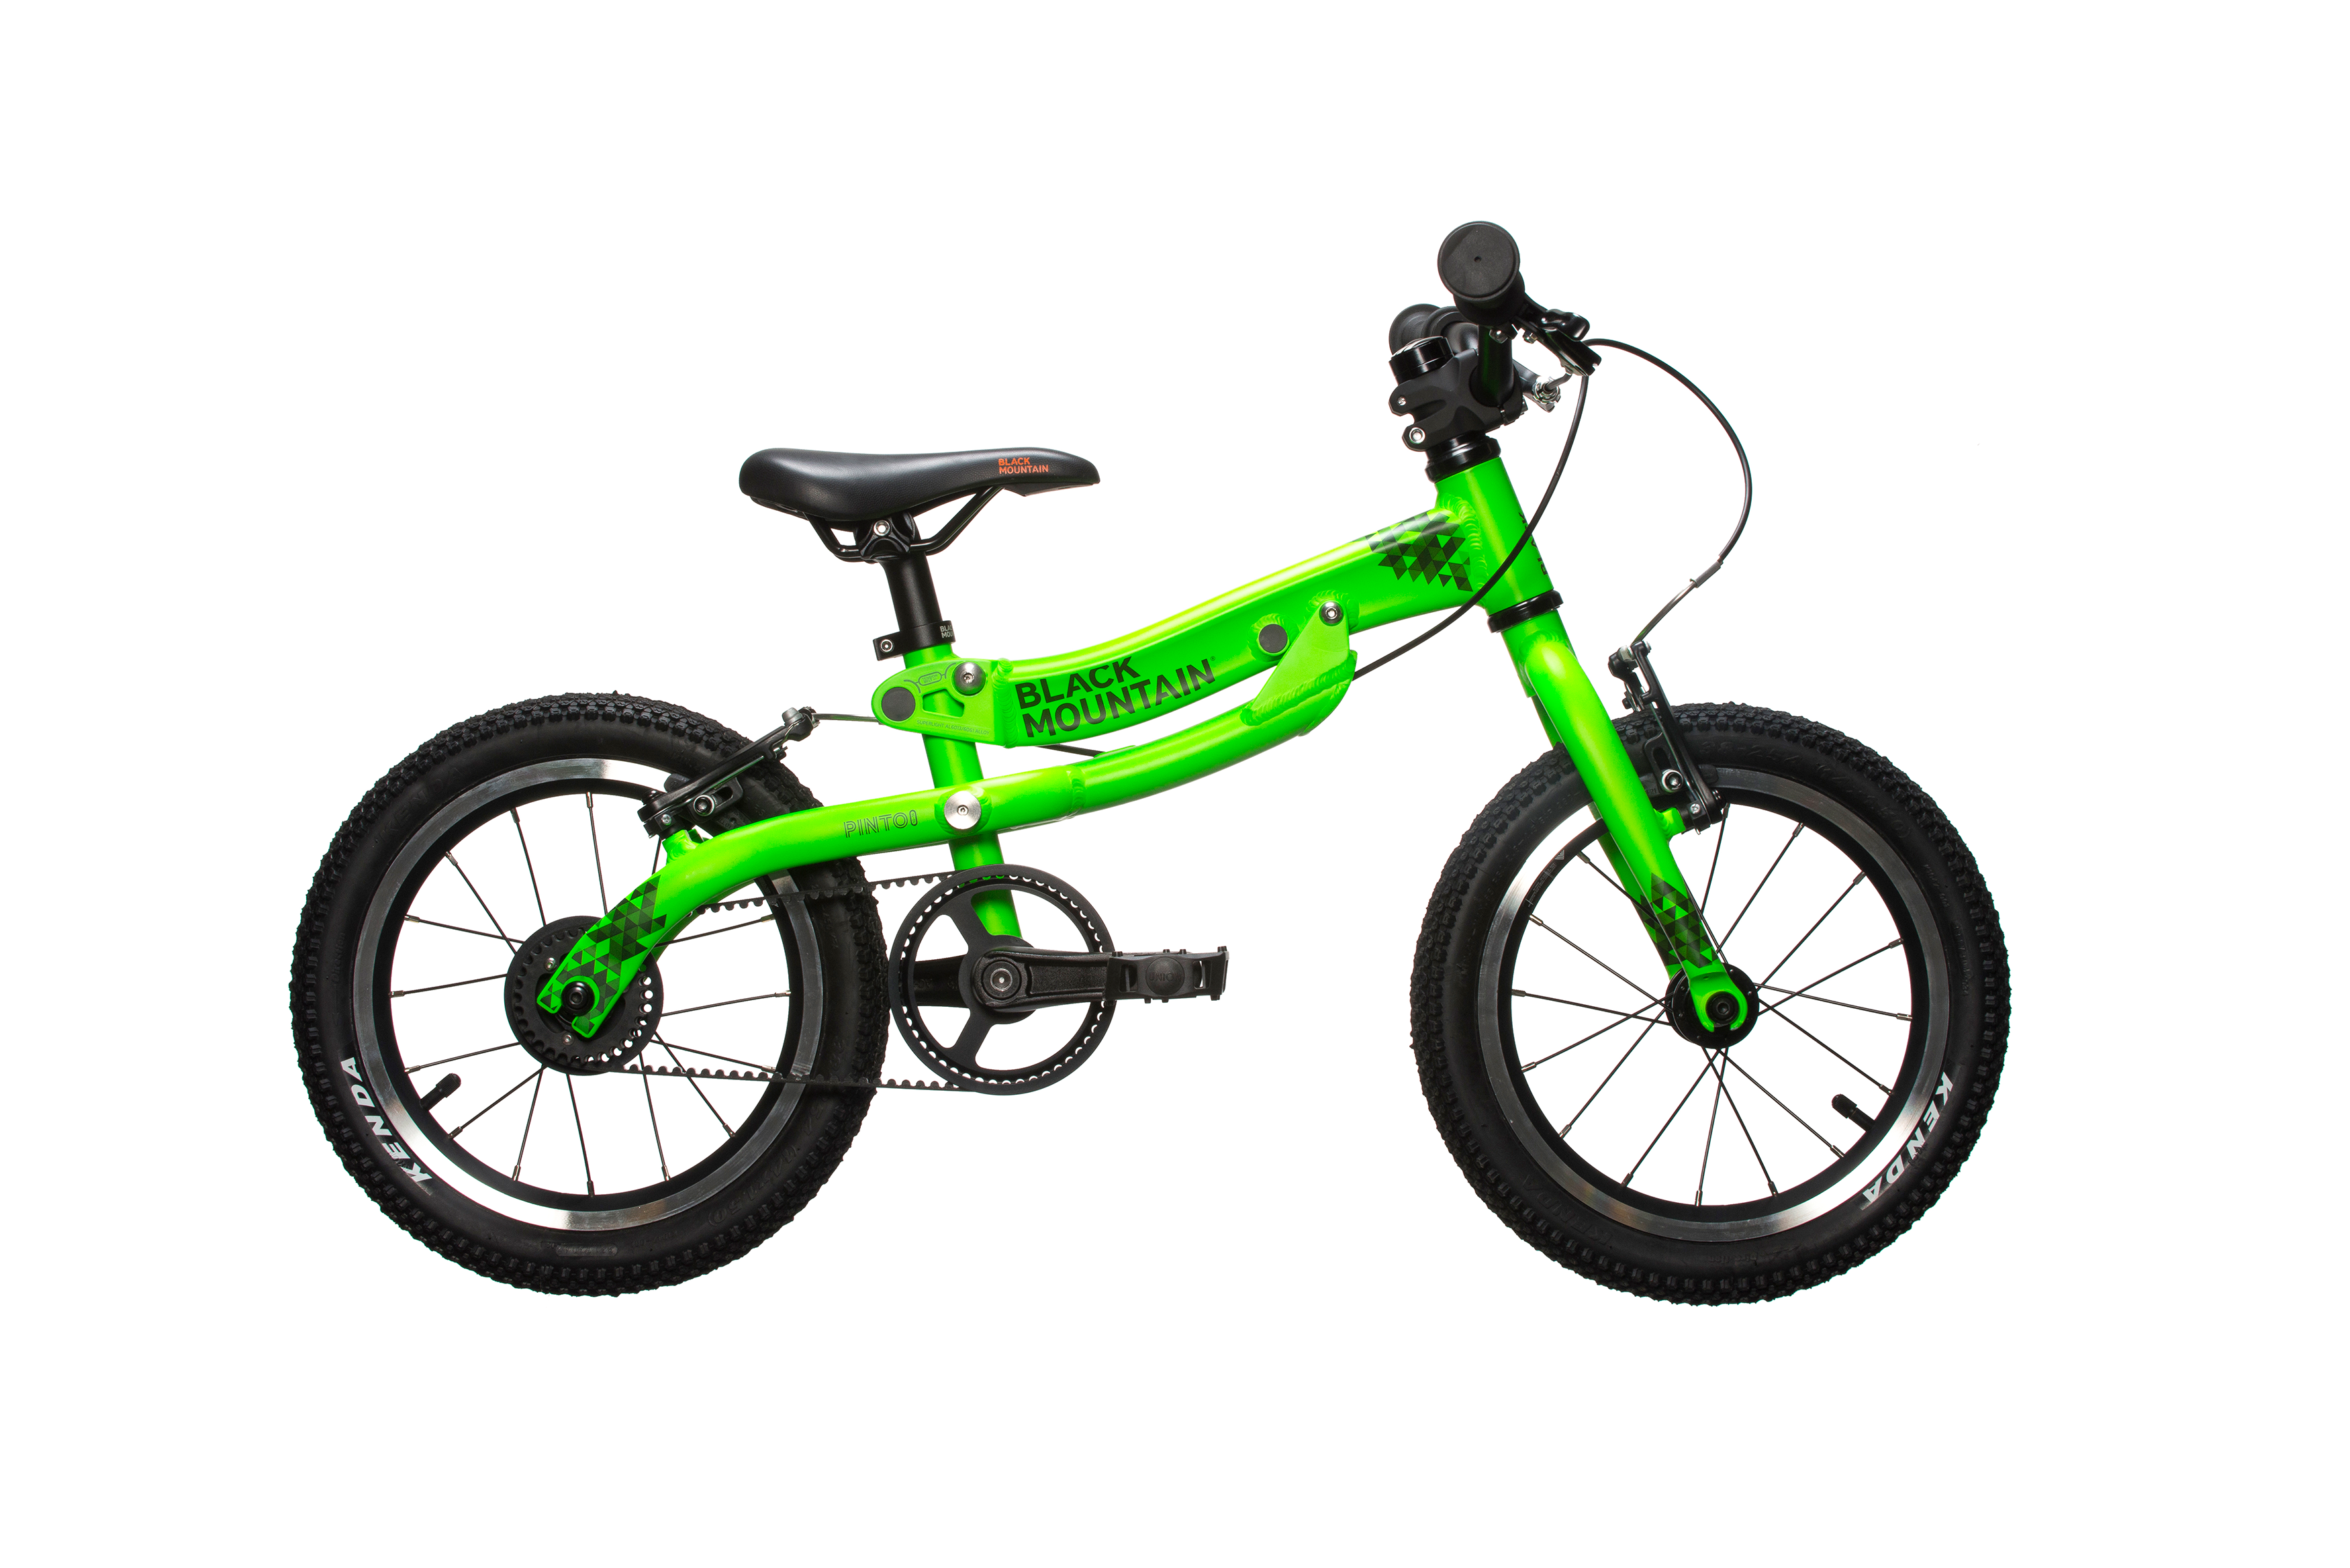 How to choose a bike for your child?